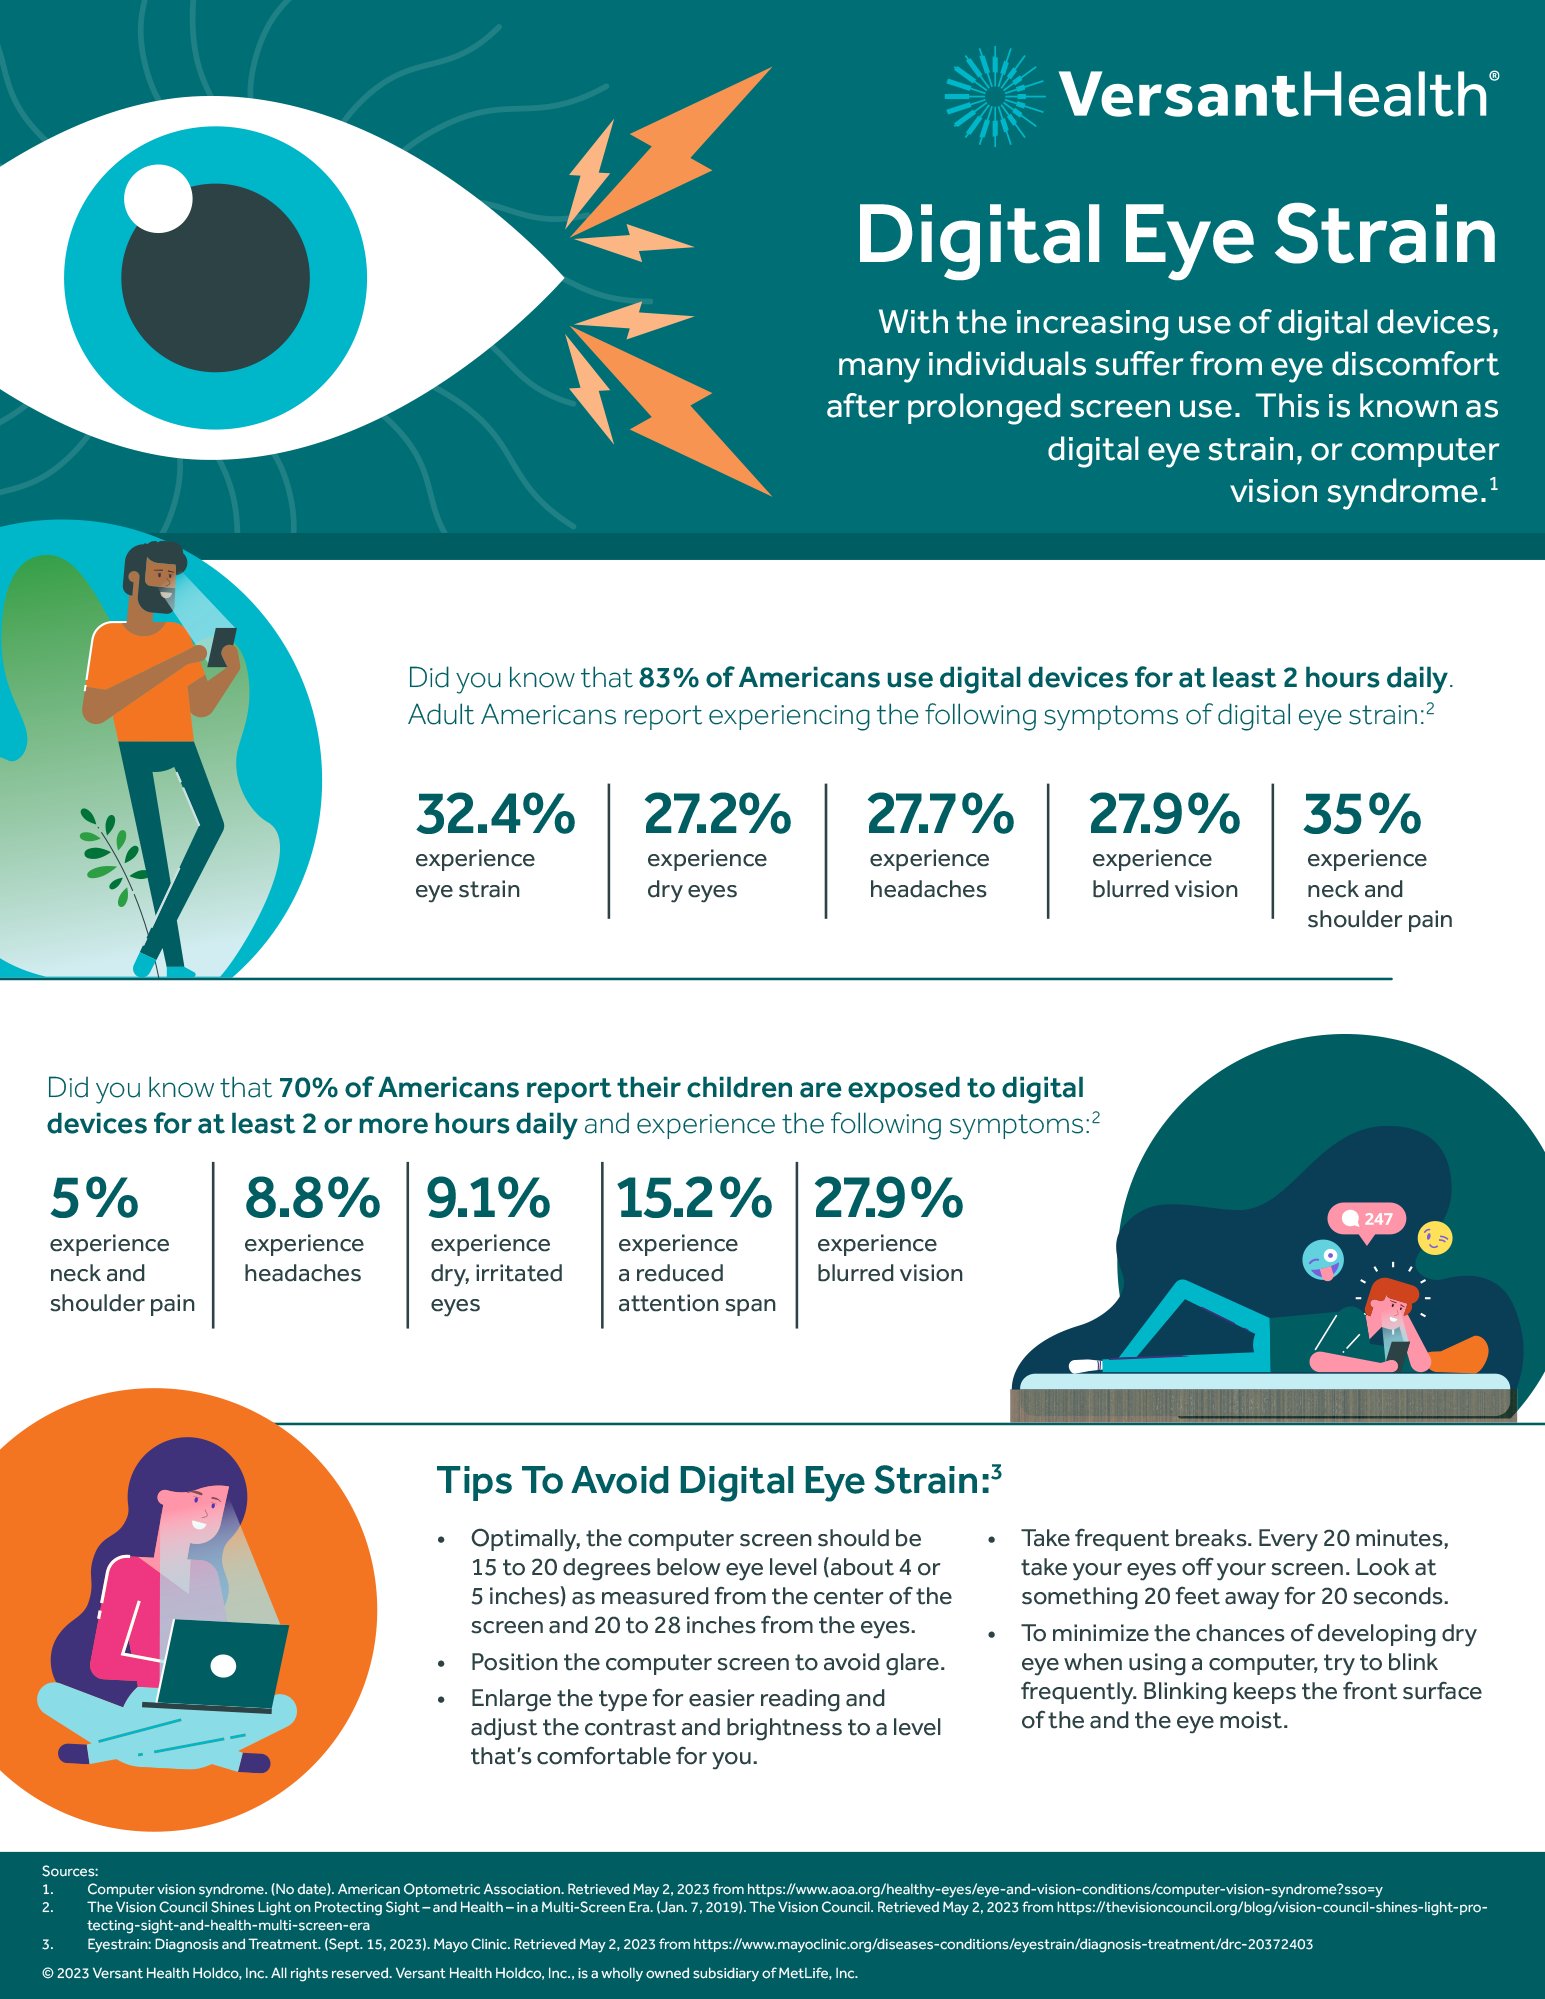 An infographic that talks about digital eyestrain, which occurs after prolonged screen use